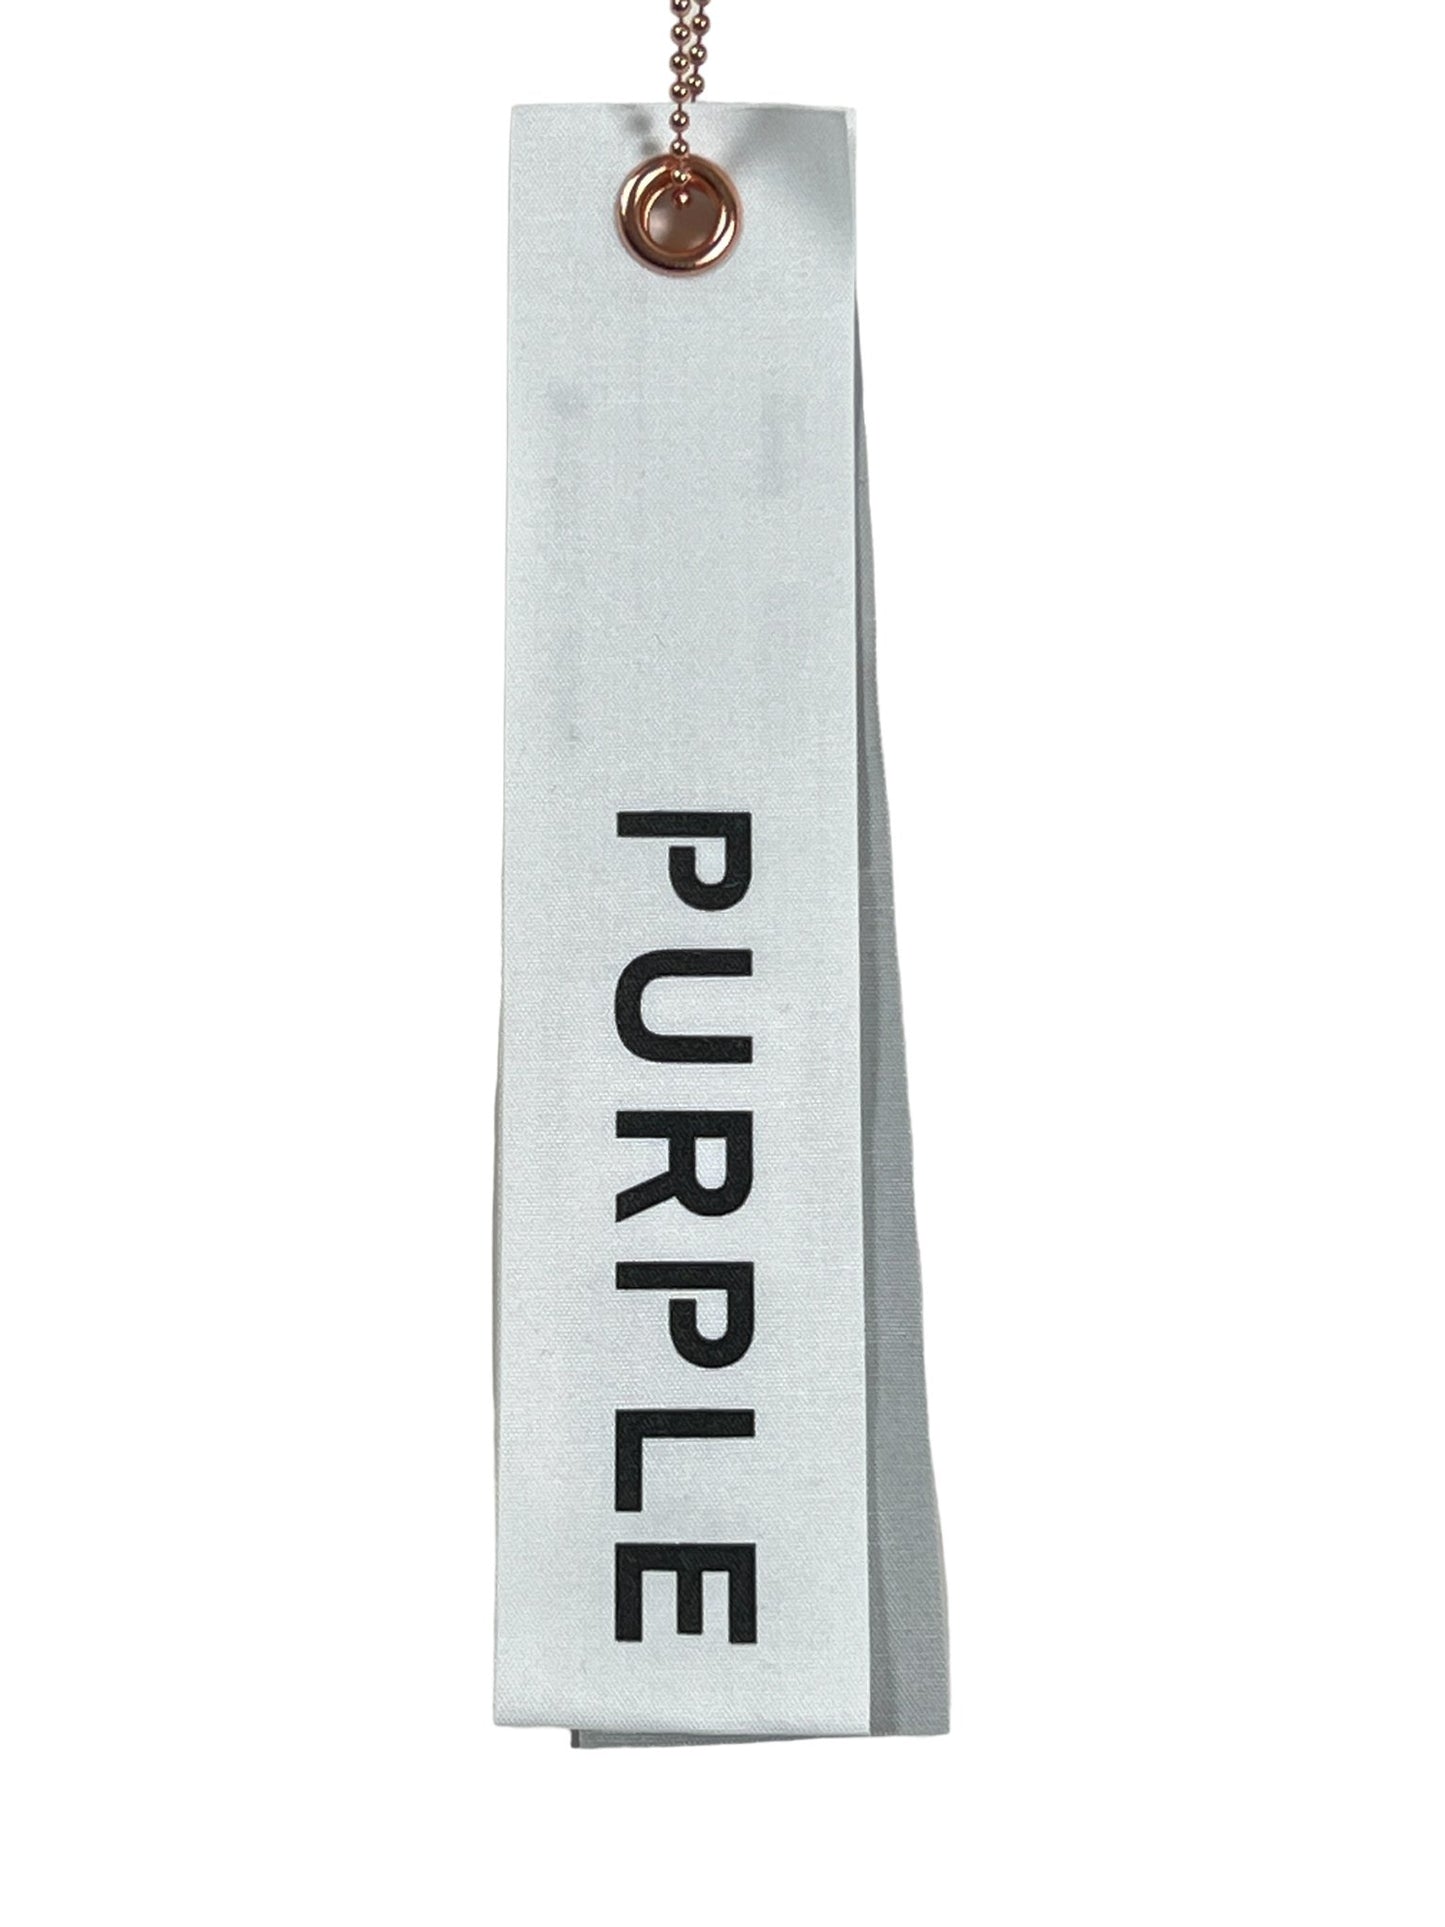 Gray bookmark with the word "purple" printed on it, hanging from a copper-colored ring and attached to a PURPLE BRAND P447-FFBB FRENCH TERRY PO HOODY BLACK.